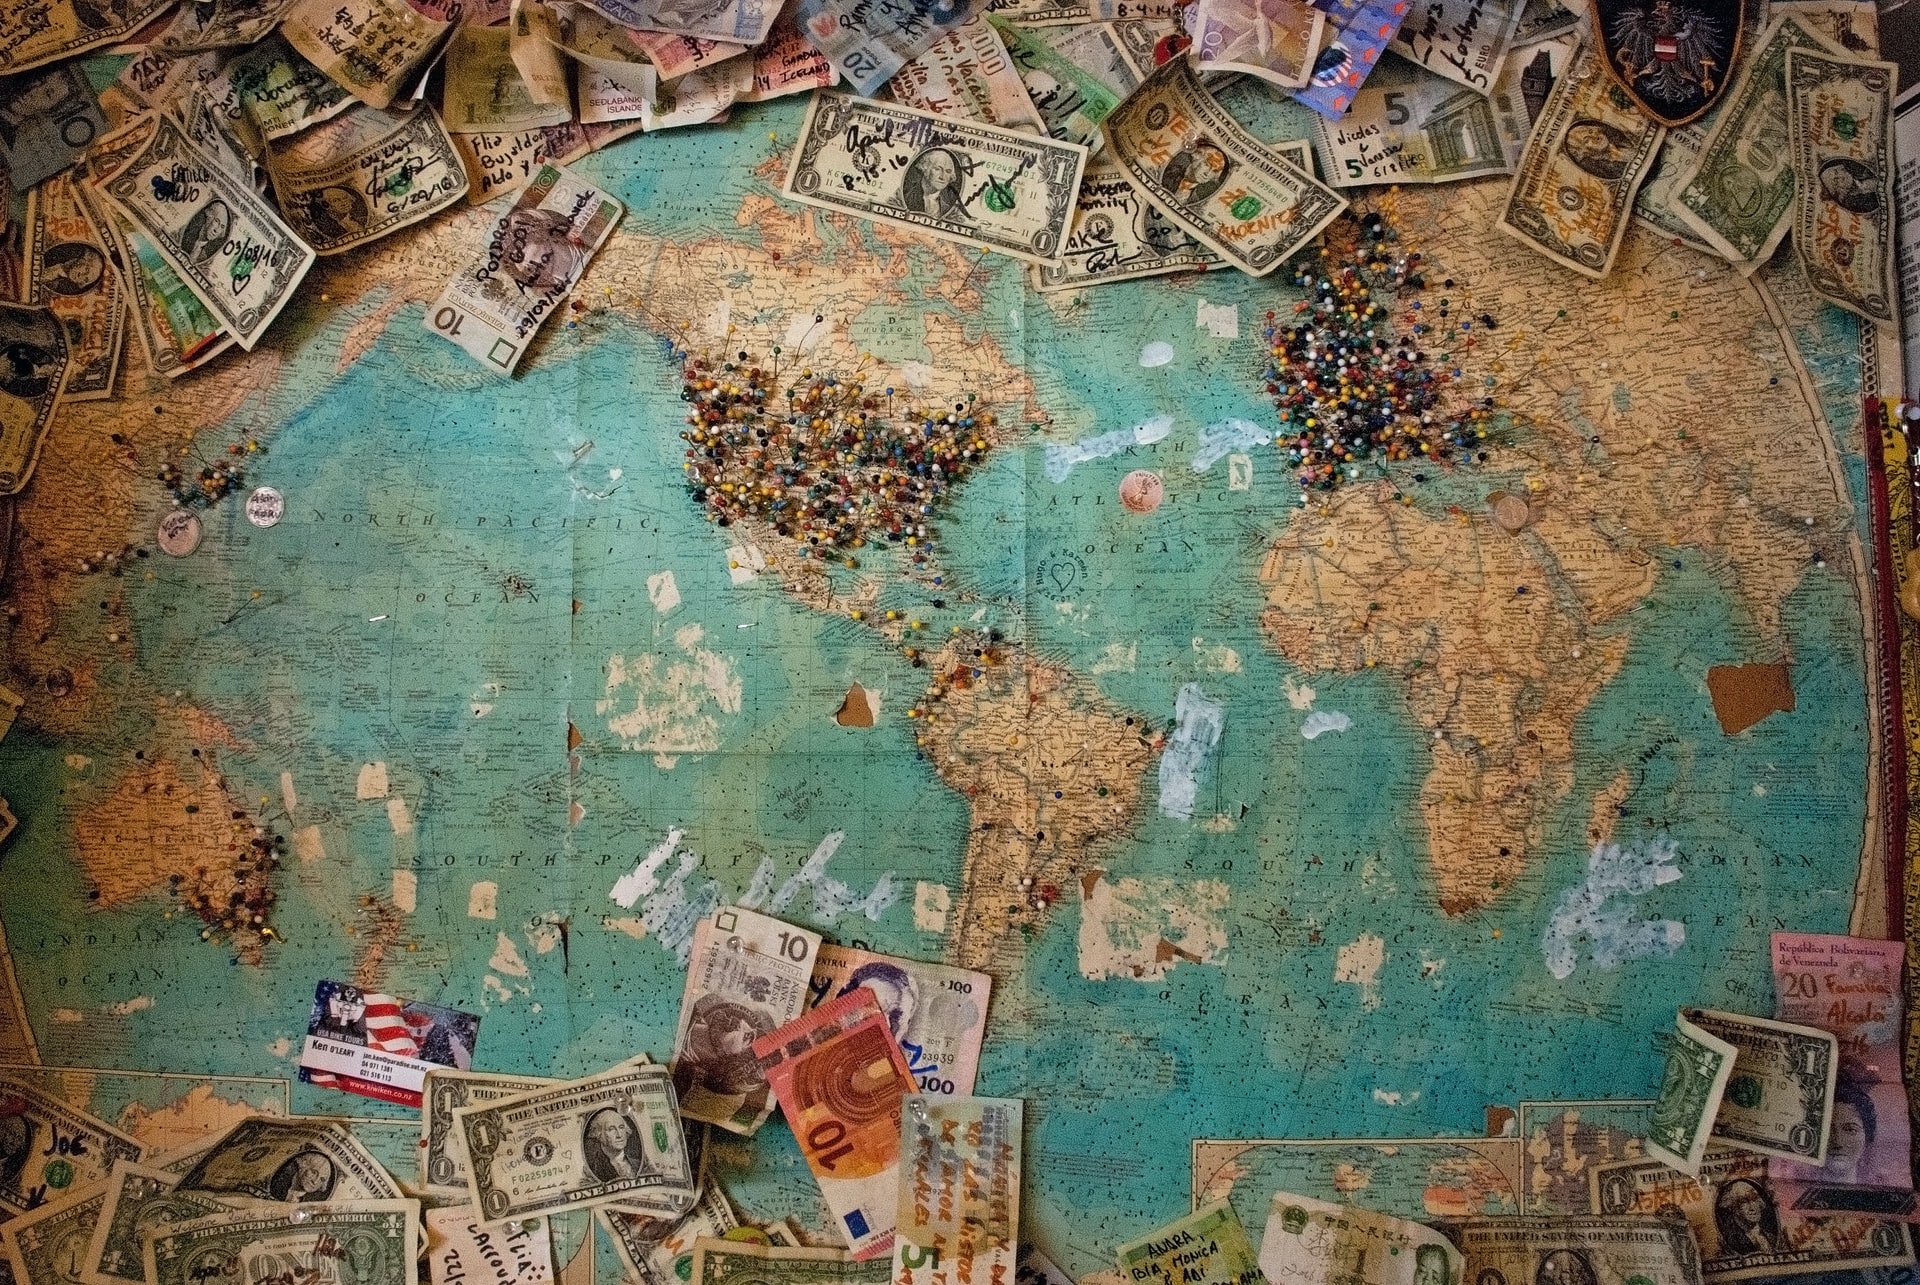 A map of the world, surrounded by currencies from different countries